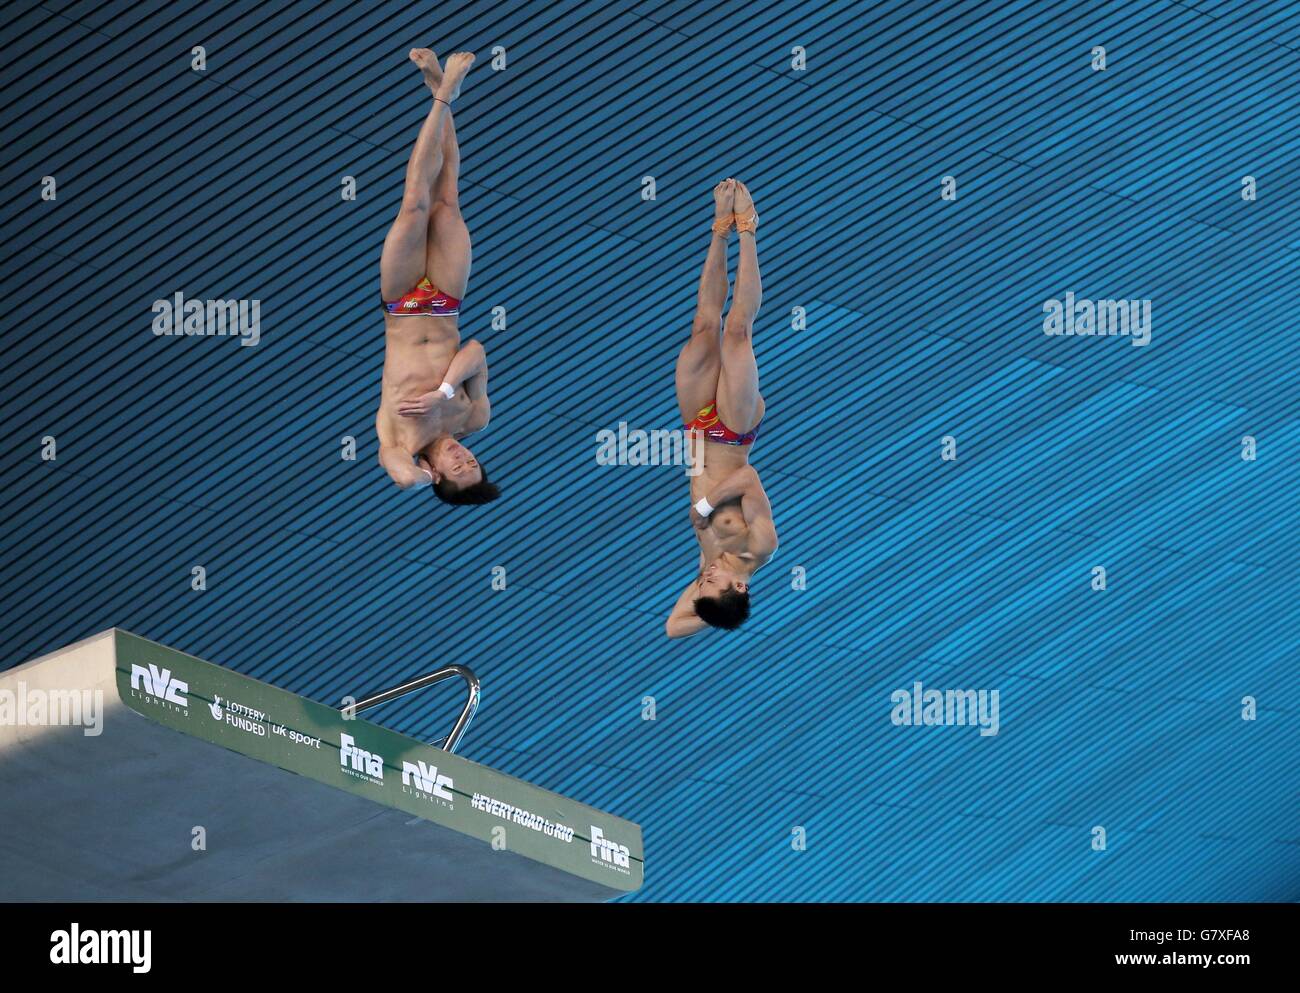 Diving - The FINA Diving World Series - Day One - London Aquatics Centre Stock Photo